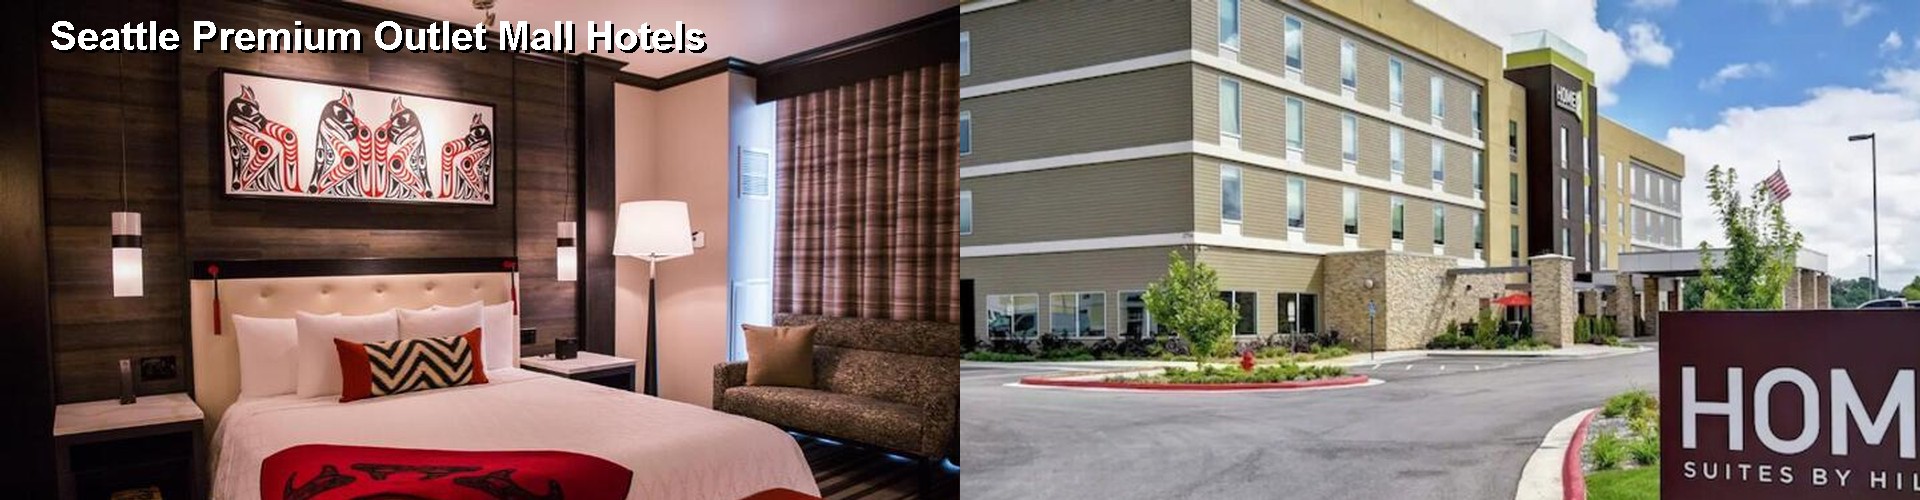 2 Best Hotels near Seattle Premium Outlet Mall